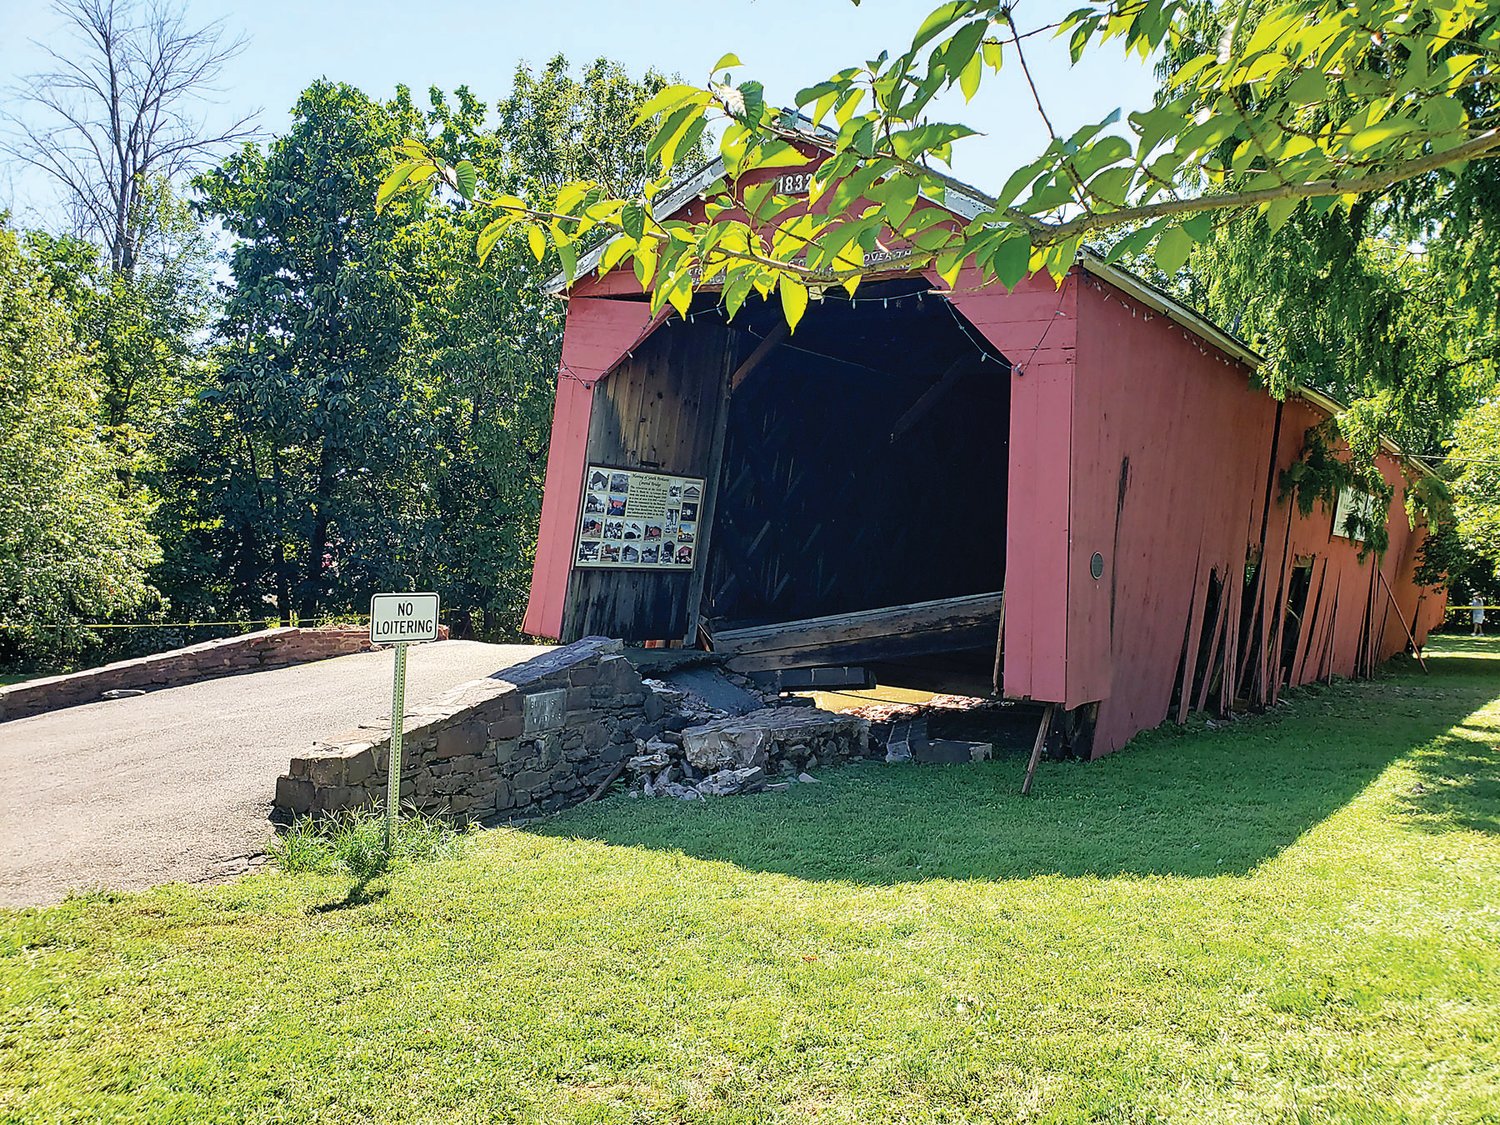 The South Perkasie Covered Bridge, constructed in 1832, was pushed off its abutments by flood waters.